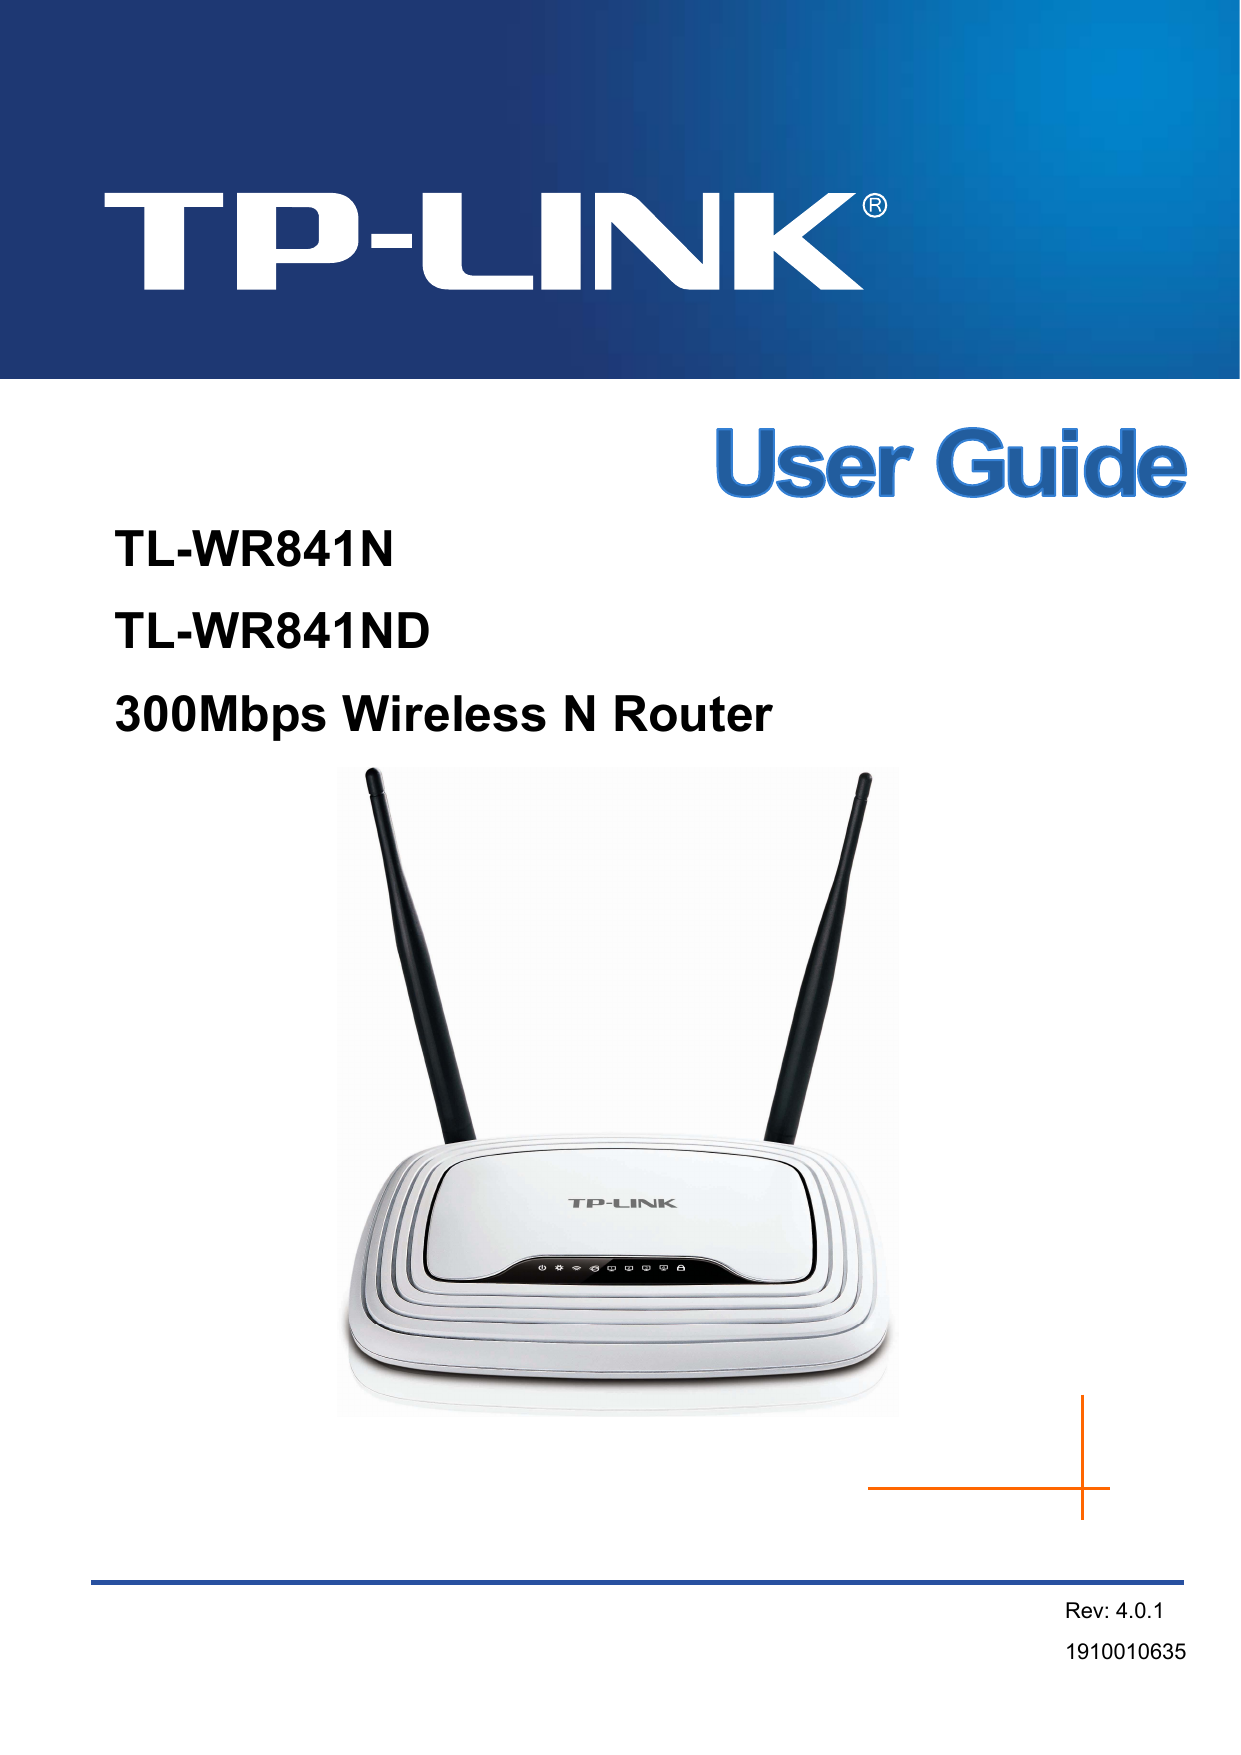   TL-WR841N TL-WR841ND 300Mbps Wireless N Router  Rev: 4.0.1 1910010635   